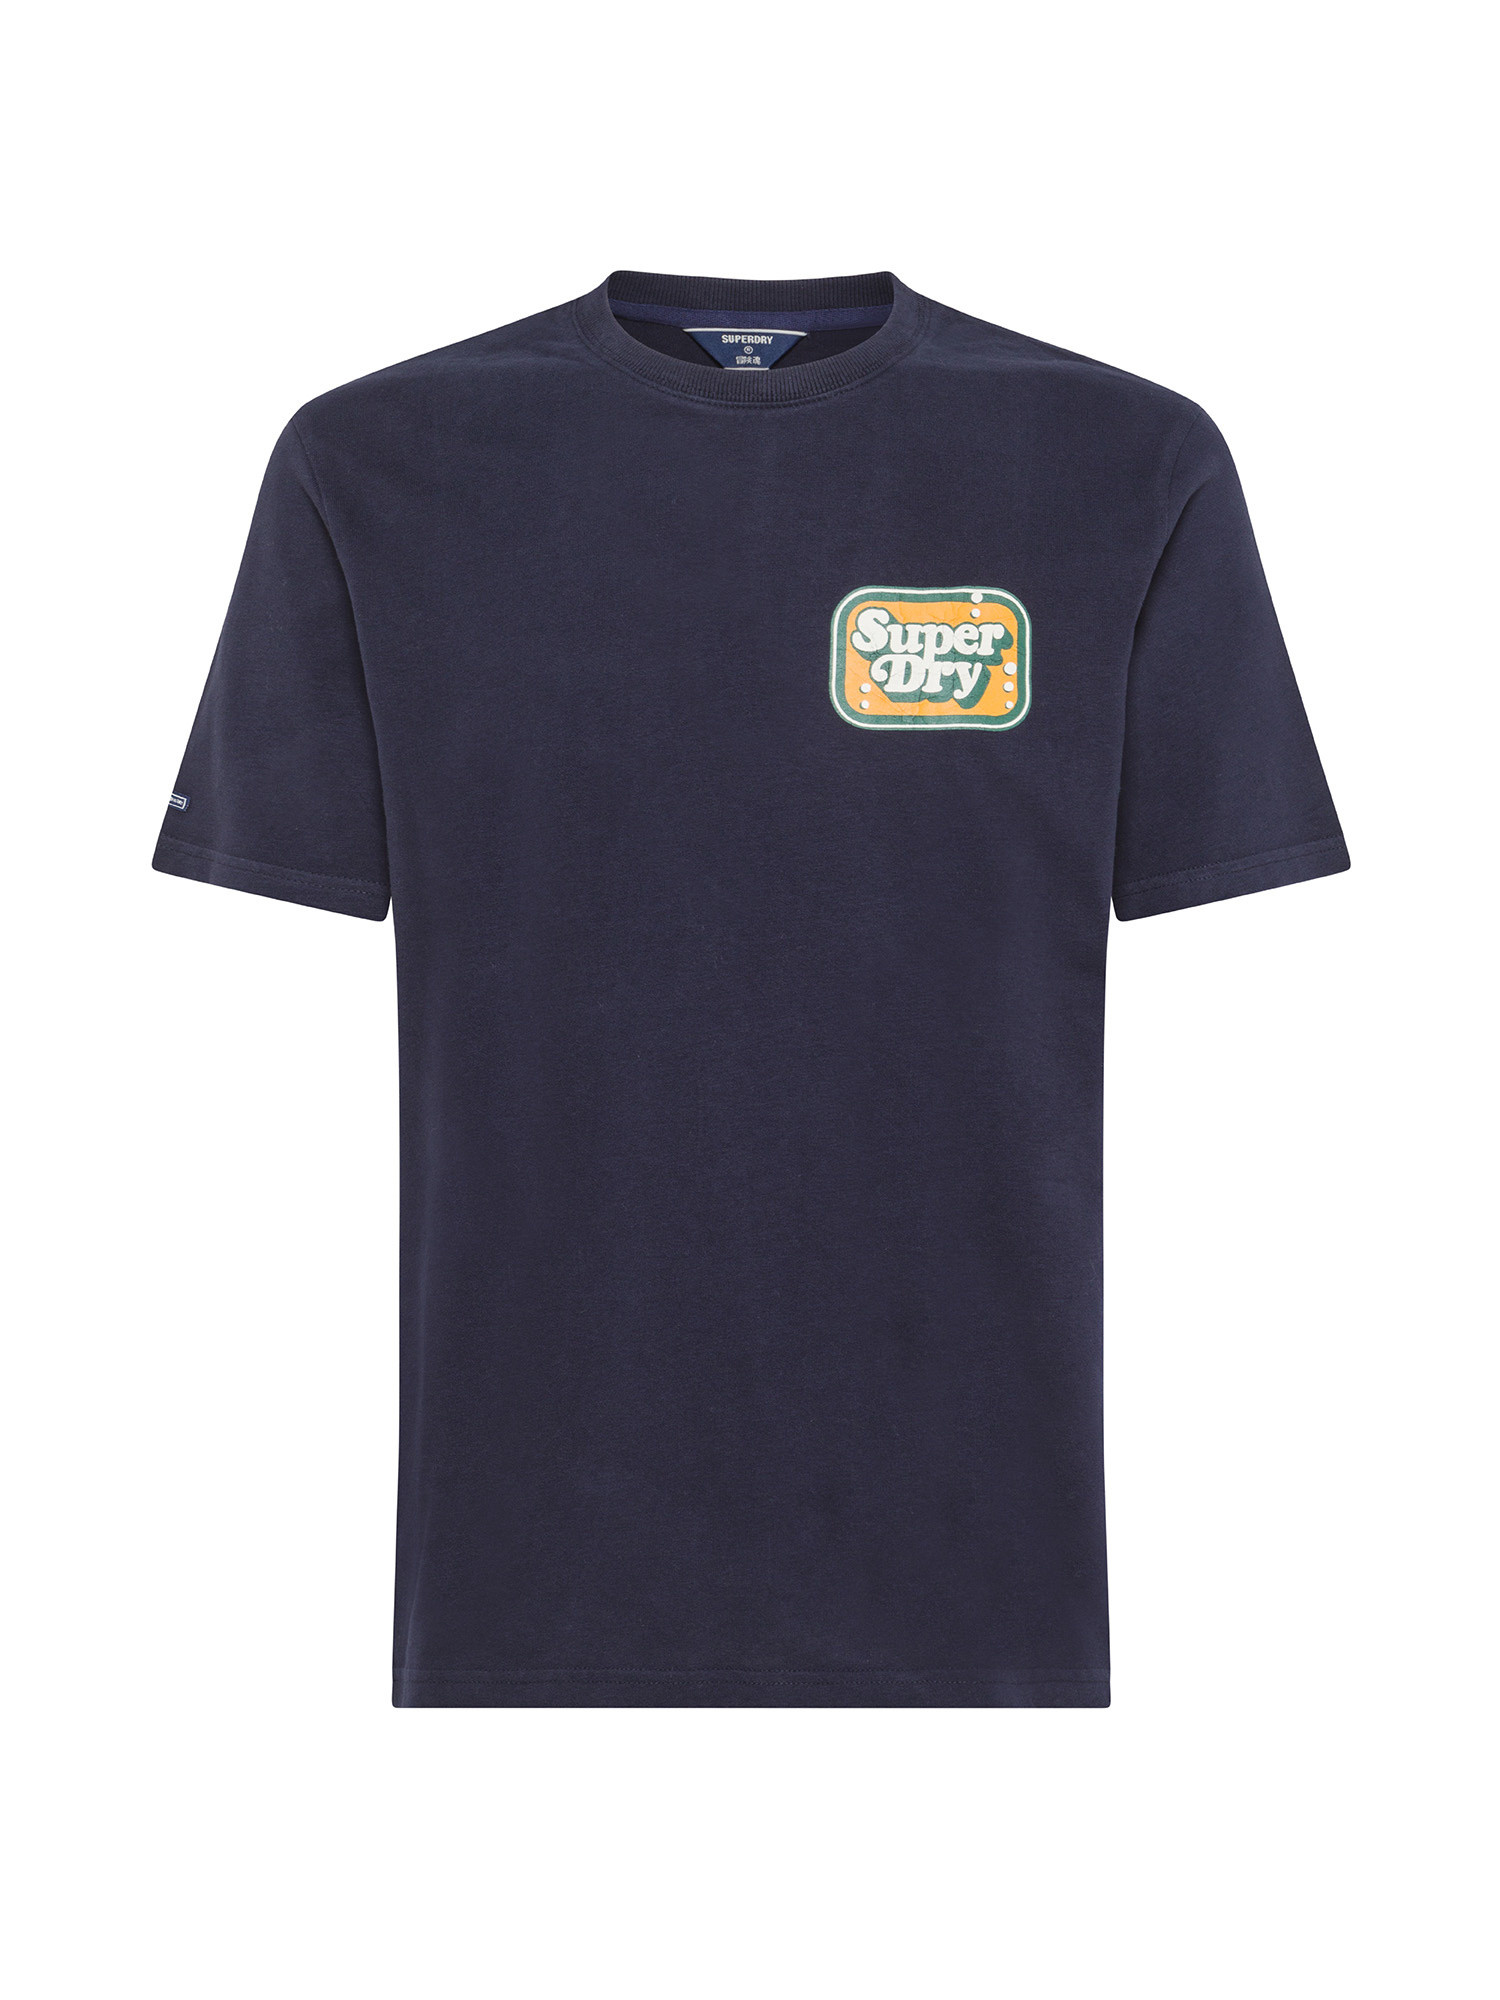 Superdry - T- shirt con stampa grafica, Blu scuro, large image number 0